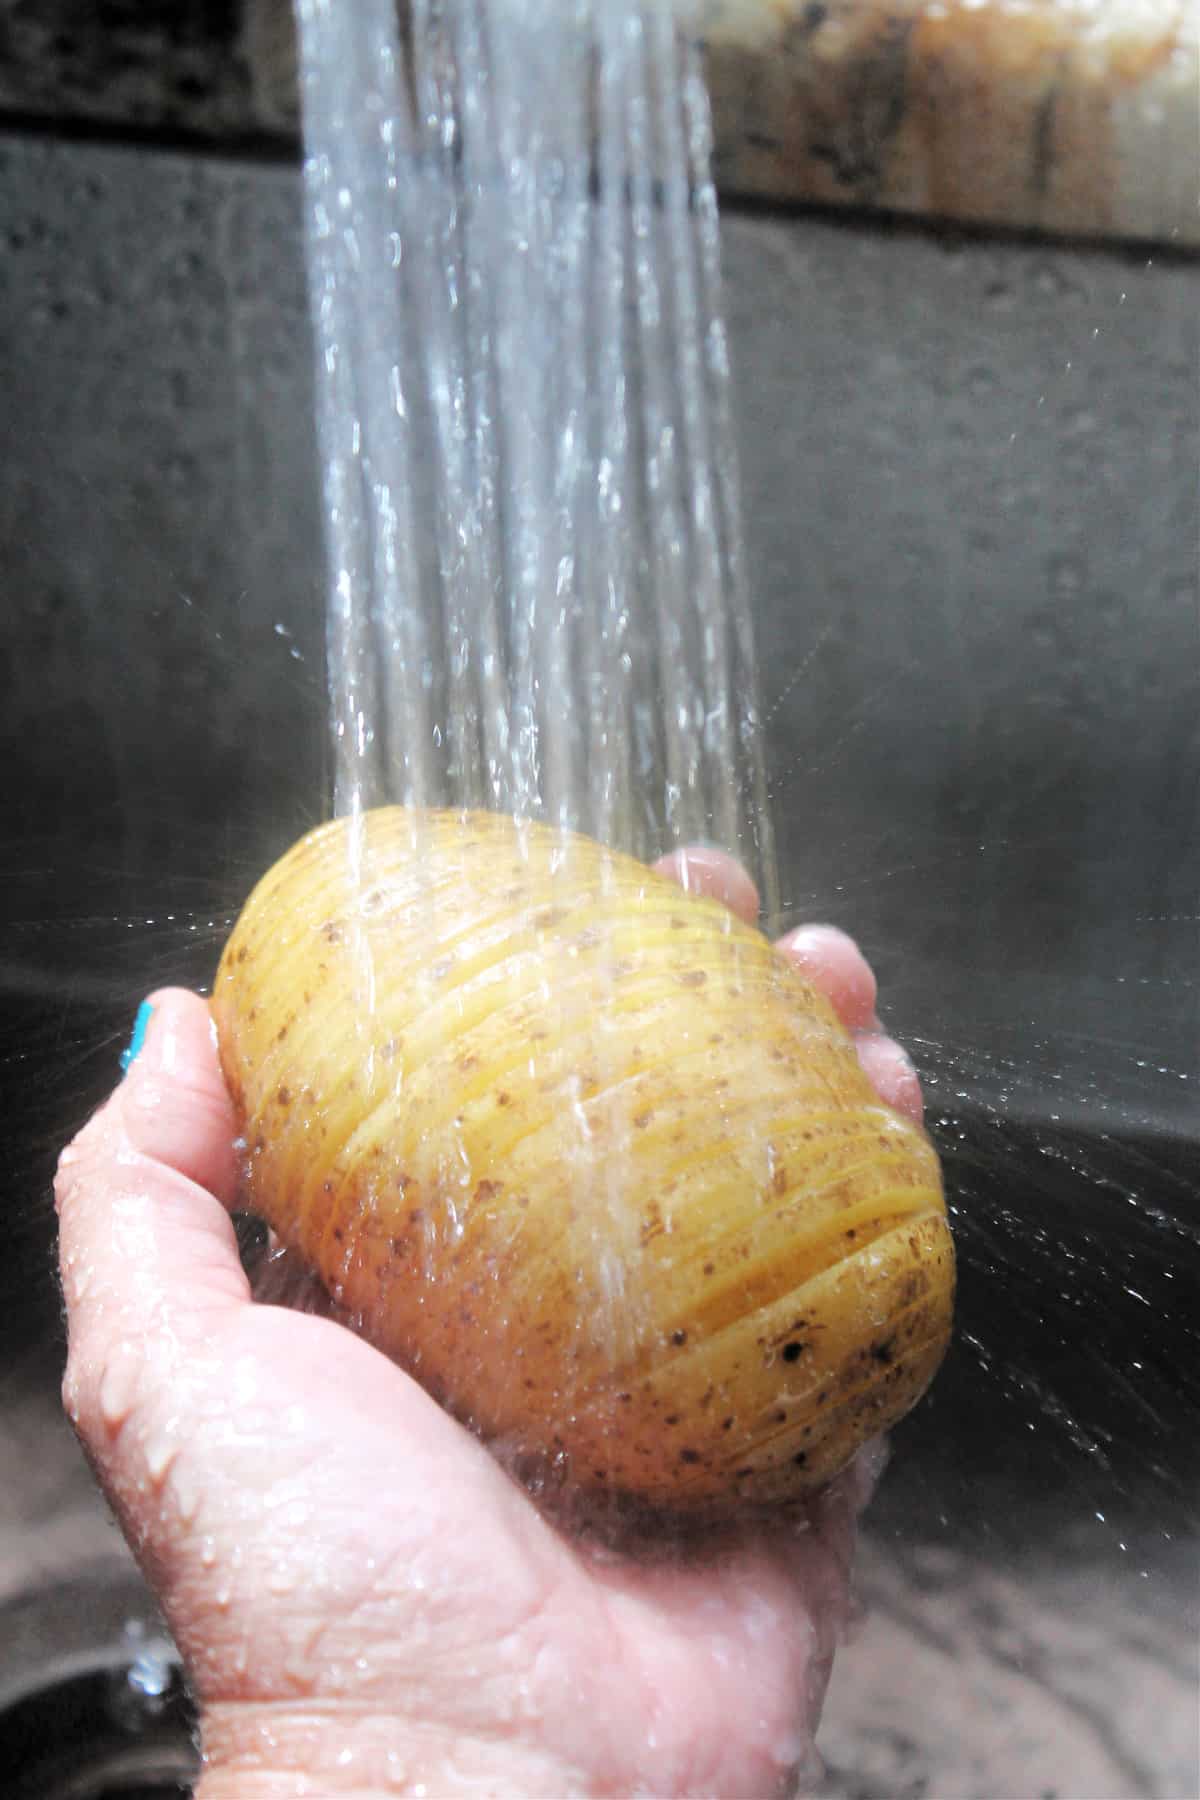 Process shot of rinsing potato under cold water.